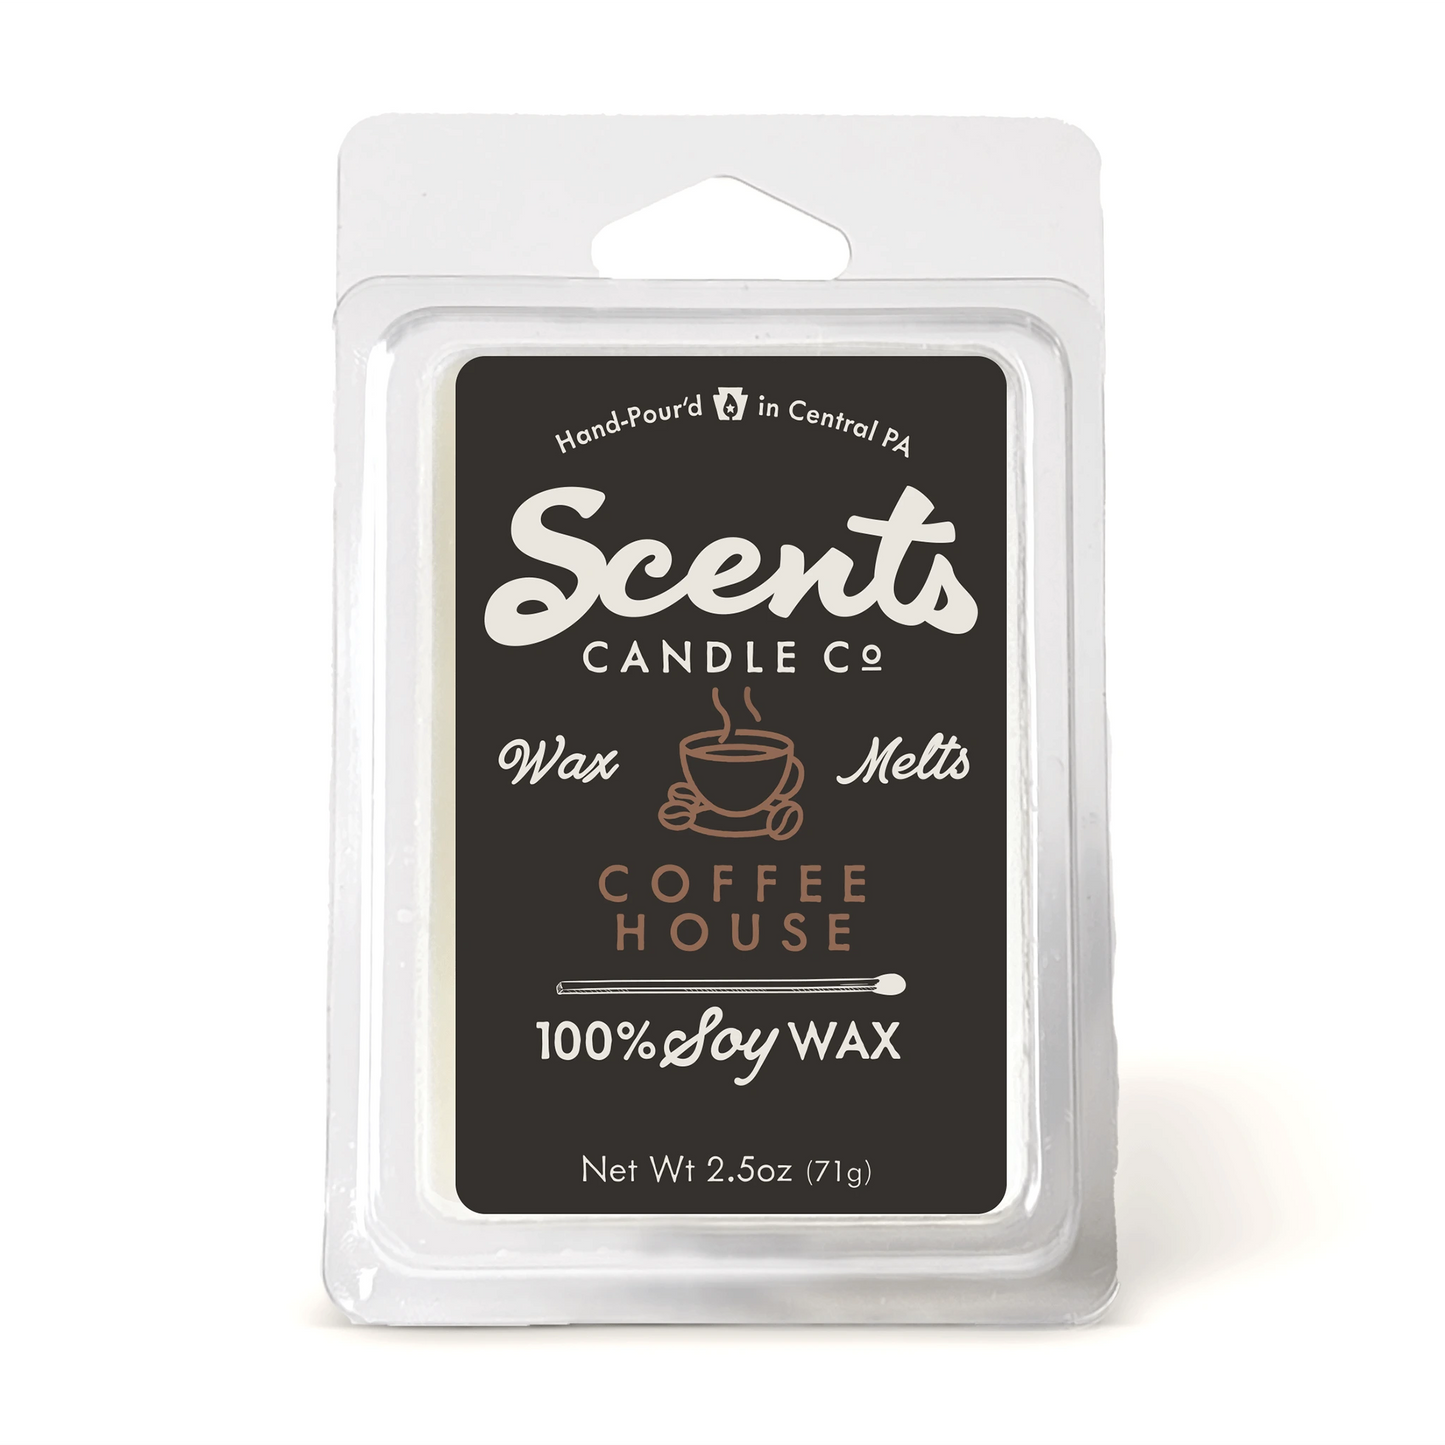 Scents Candle Co. Coffee House Wax Melt